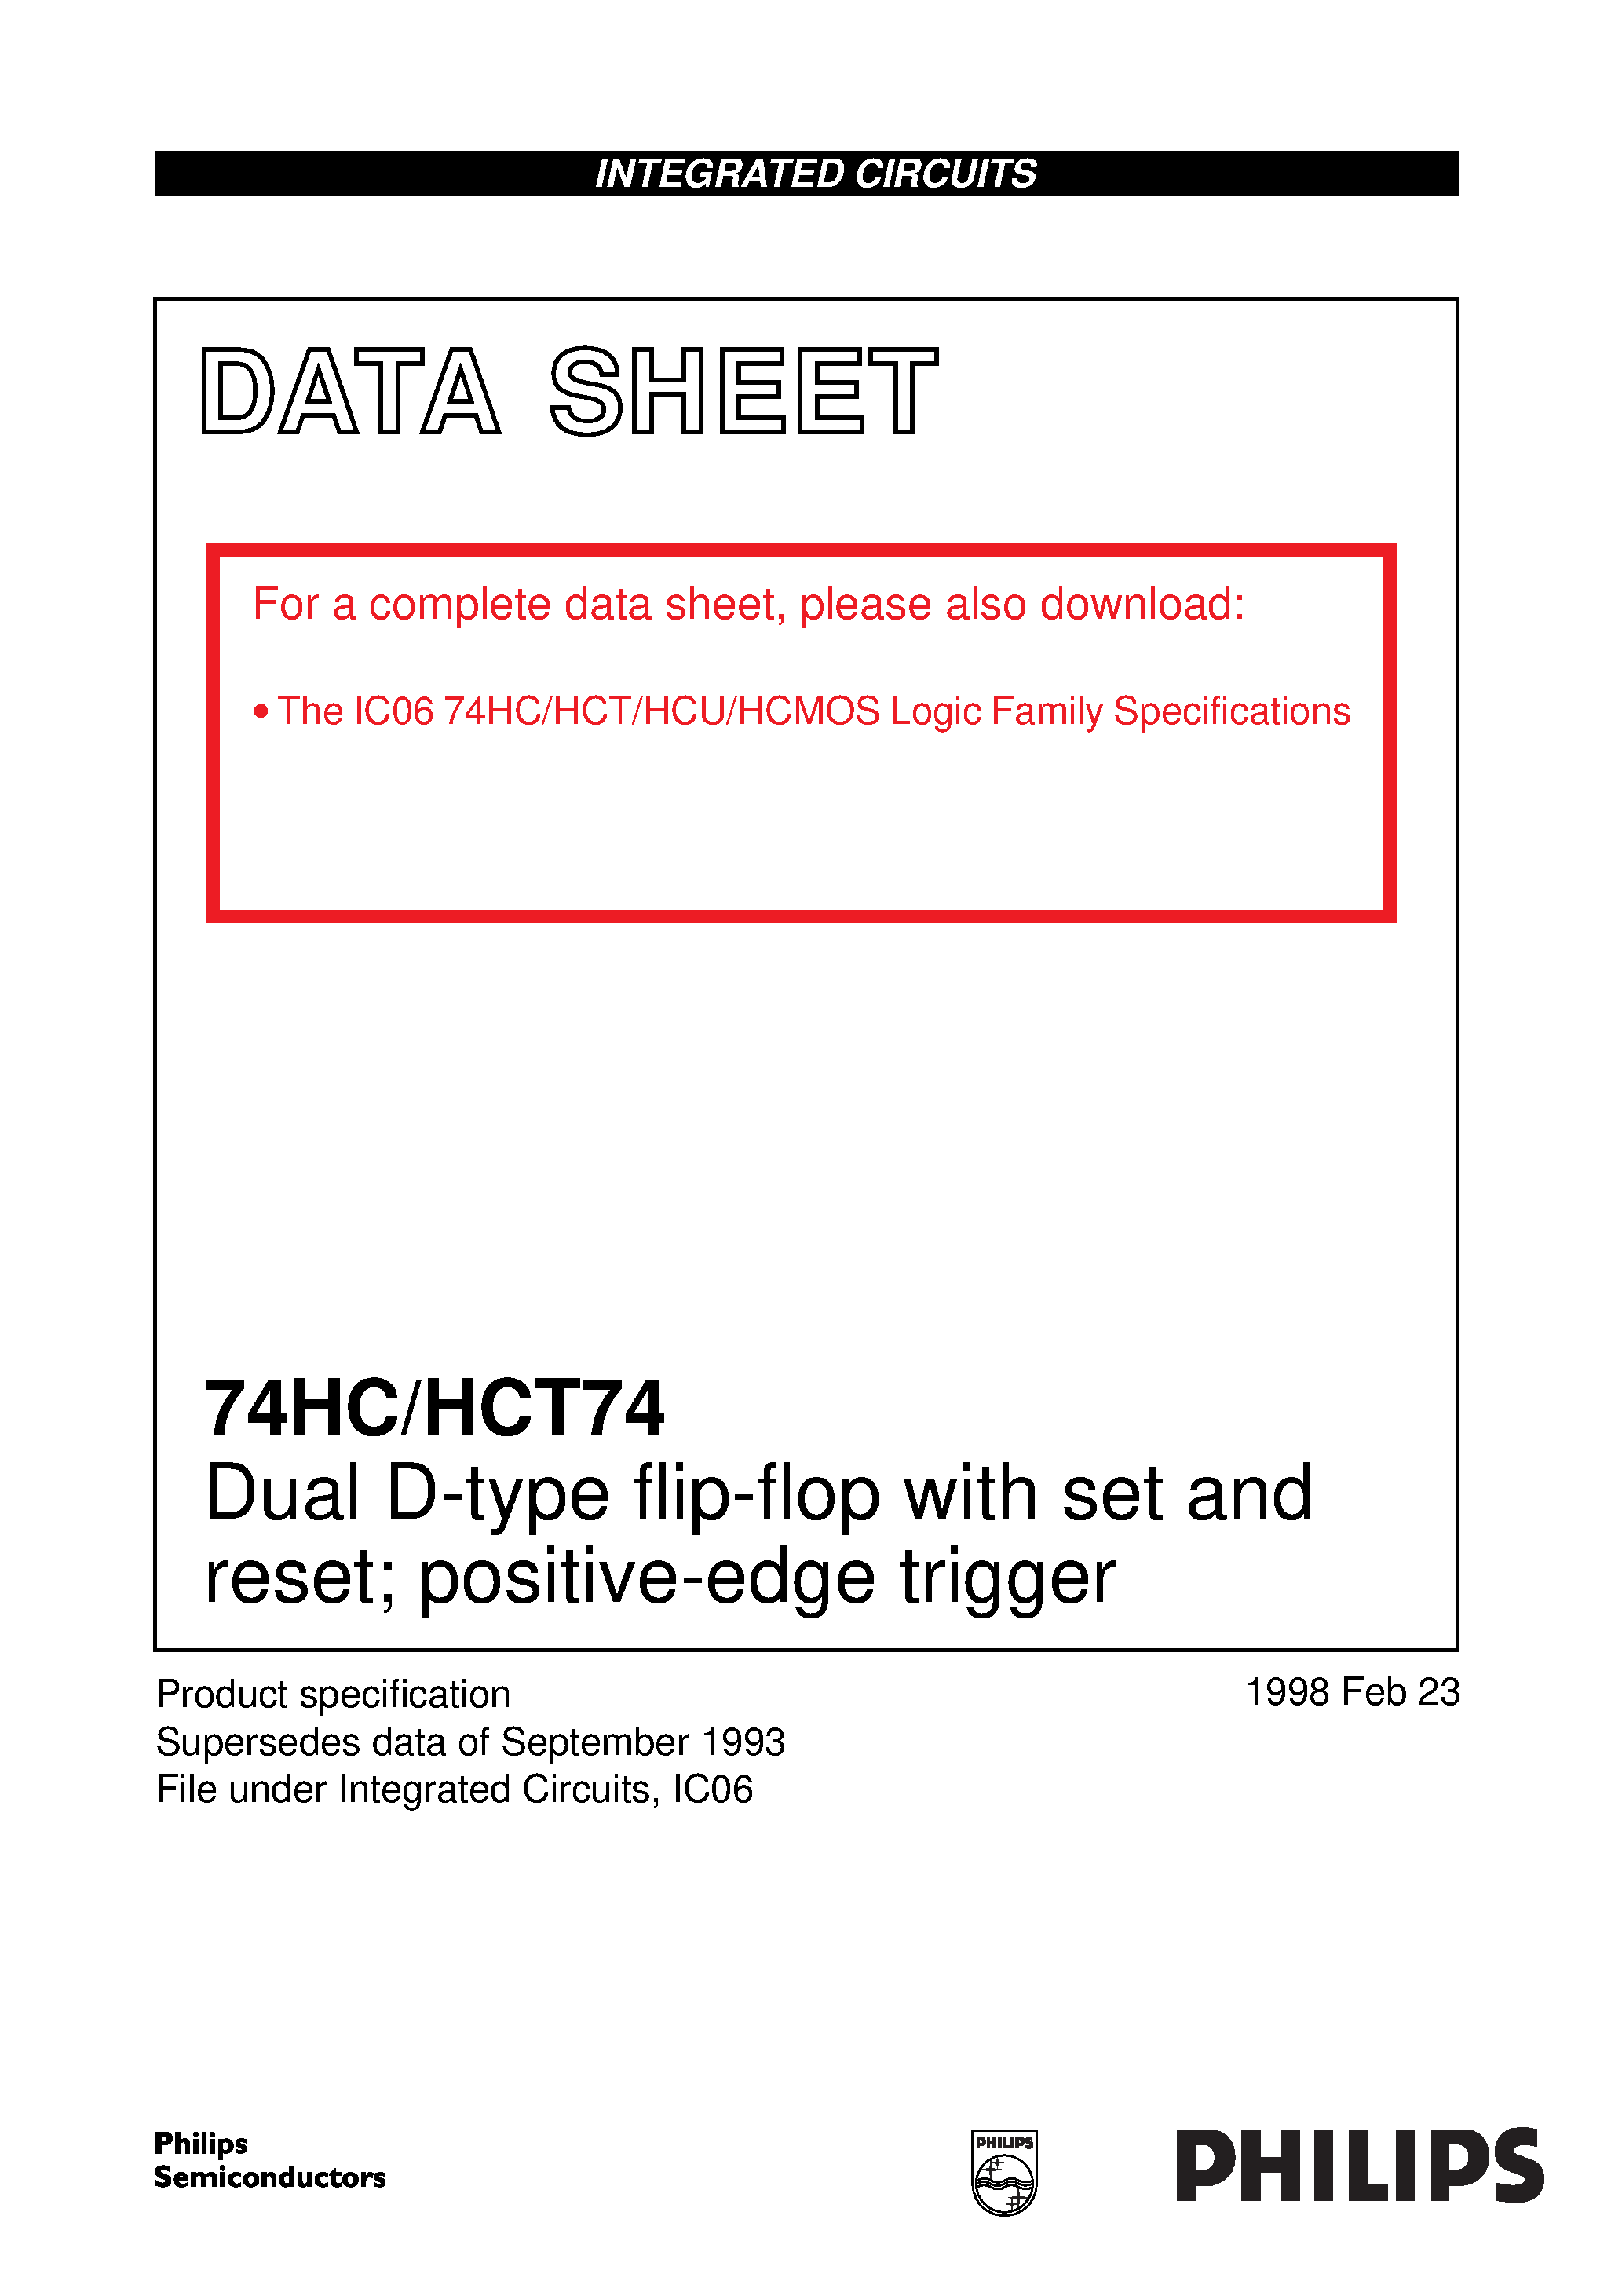 Datasheet 74HCT74 - Dual D-type flip-flop with set and reset; positive-edge trigger page 1